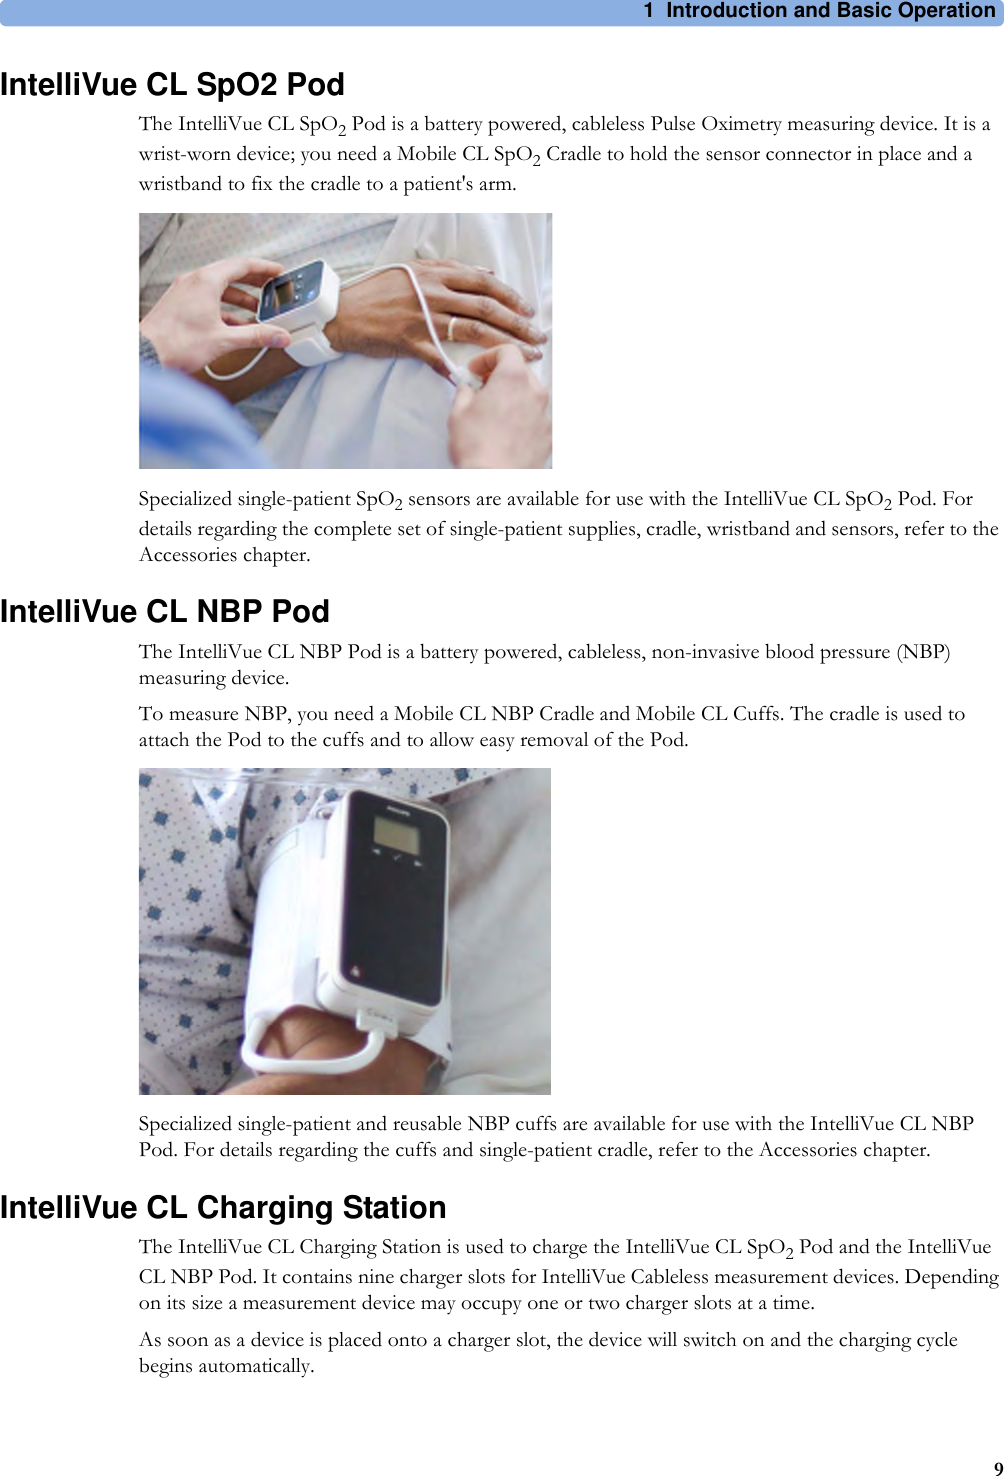 1 Introduction and Basic Operation9IntelliVue CL SpO2 PodThe IntelliVue CL SpO2 Pod is a battery powered, cableless Pulse Oximetry measuring device. It is a wrist-worn device; you need a Mobile CL SpO2 Cradle to hold the sensor connector in place and a wristband to fix the cradle to a patient&apos;s arm.Specialized single-patient SpO2 sensors are available for use with the IntelliVue CL SpO2 Pod. For details regarding the complete set of single-patient supplies, cradle, wristband and sensors, refer to the Accessories chapter.IntelliVue CL NBP PodThe IntelliVue CL NBP Pod is a battery powered, cableless, non-invasive blood pressure (NBP) measuring device.To measure NBP, you need a Mobile CL NBP Cradle and Mobile CL Cuffs. The cradle is used to attach the Pod to the cuffs and to allow easy removal of the Pod.Specialized single-patient and reusable NBP cuffs are available for use with the IntelliVue CL NBP Pod. For details regarding the cuffs and single-patient cradle, refer to the Accessories chapter.IntelliVue CL Charging StationThe IntelliVue CL Charging Station is used to charge the IntelliVue CL SpO2 Pod and the IntelliVue CL NBP Pod. It contains nine charger slots for IntelliVue Cableless measurement devices. Depending on its size a measurement device may occupy one or two charger slots at a time.As soon as a device is placed onto a charger slot, the device will switch on and the charging cycle begins automatically.